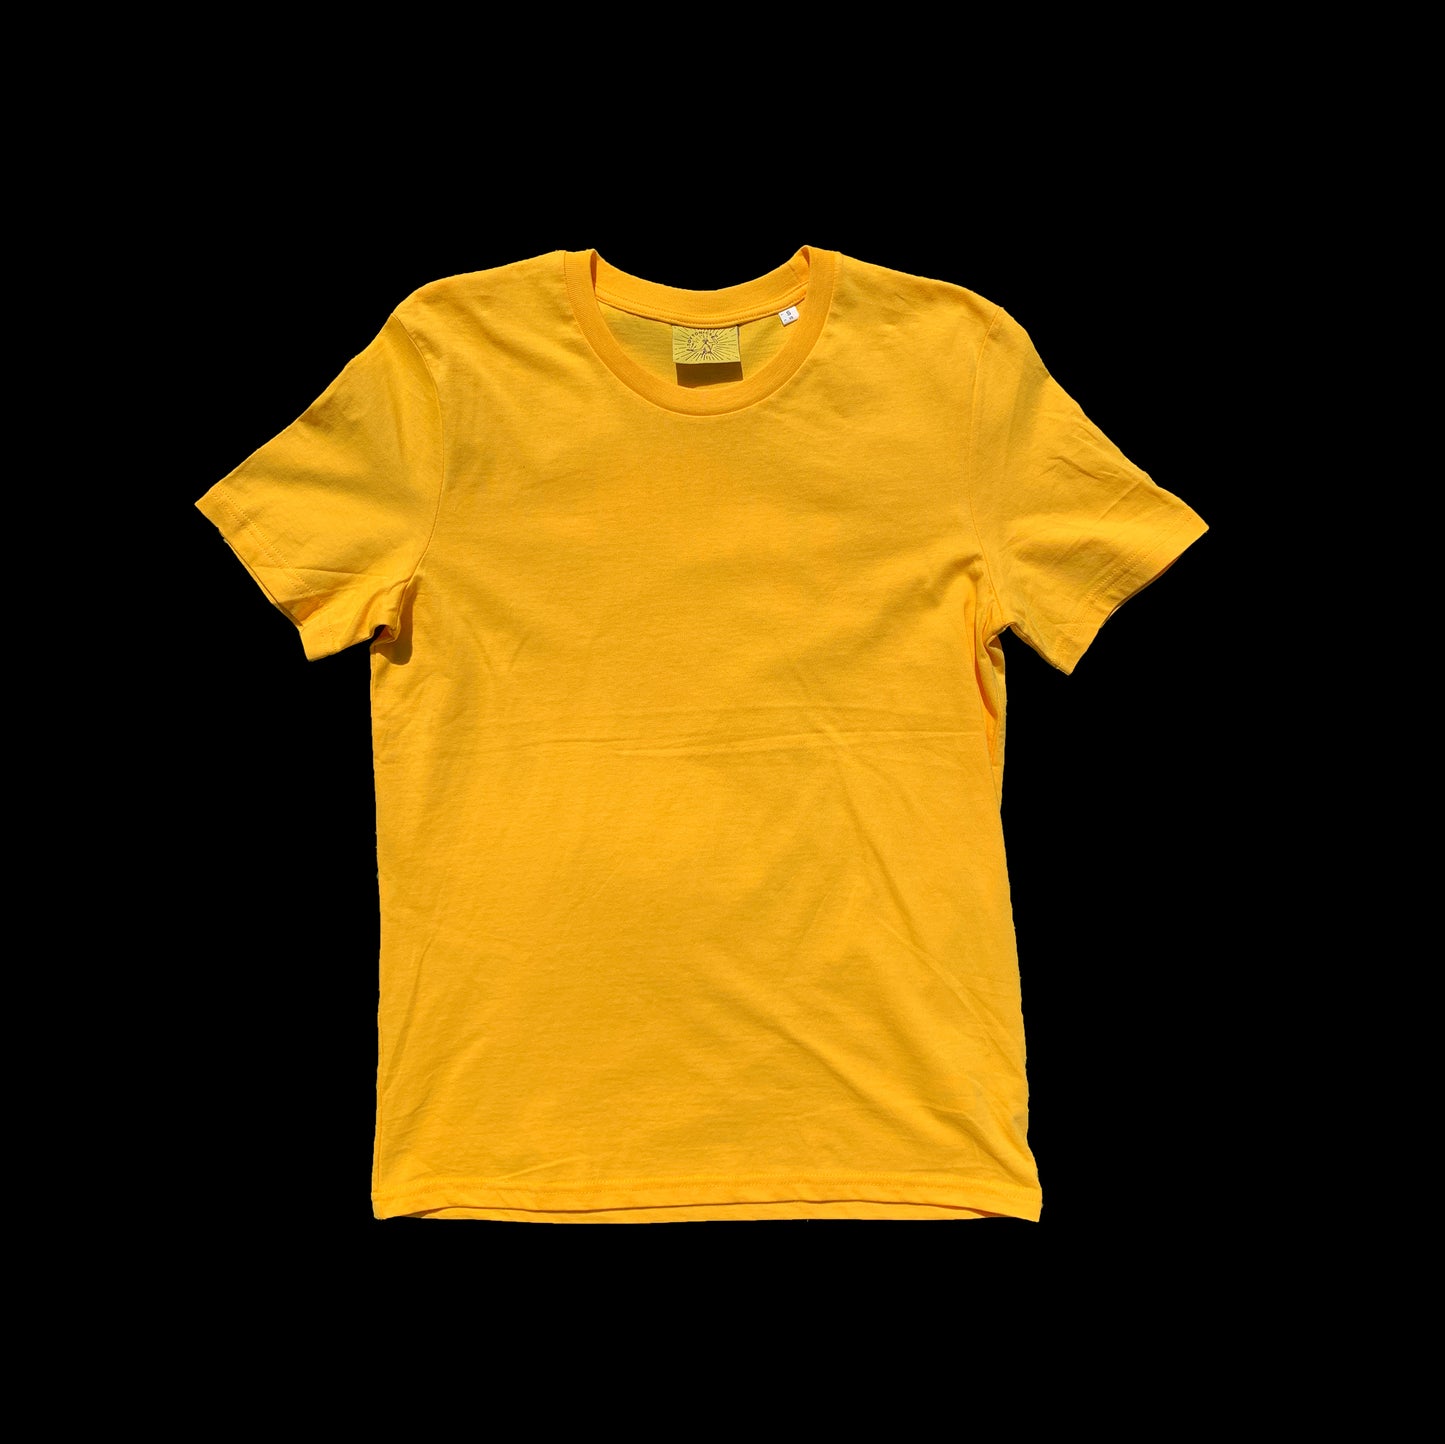 Wobble shirt yellow - Limited to 150